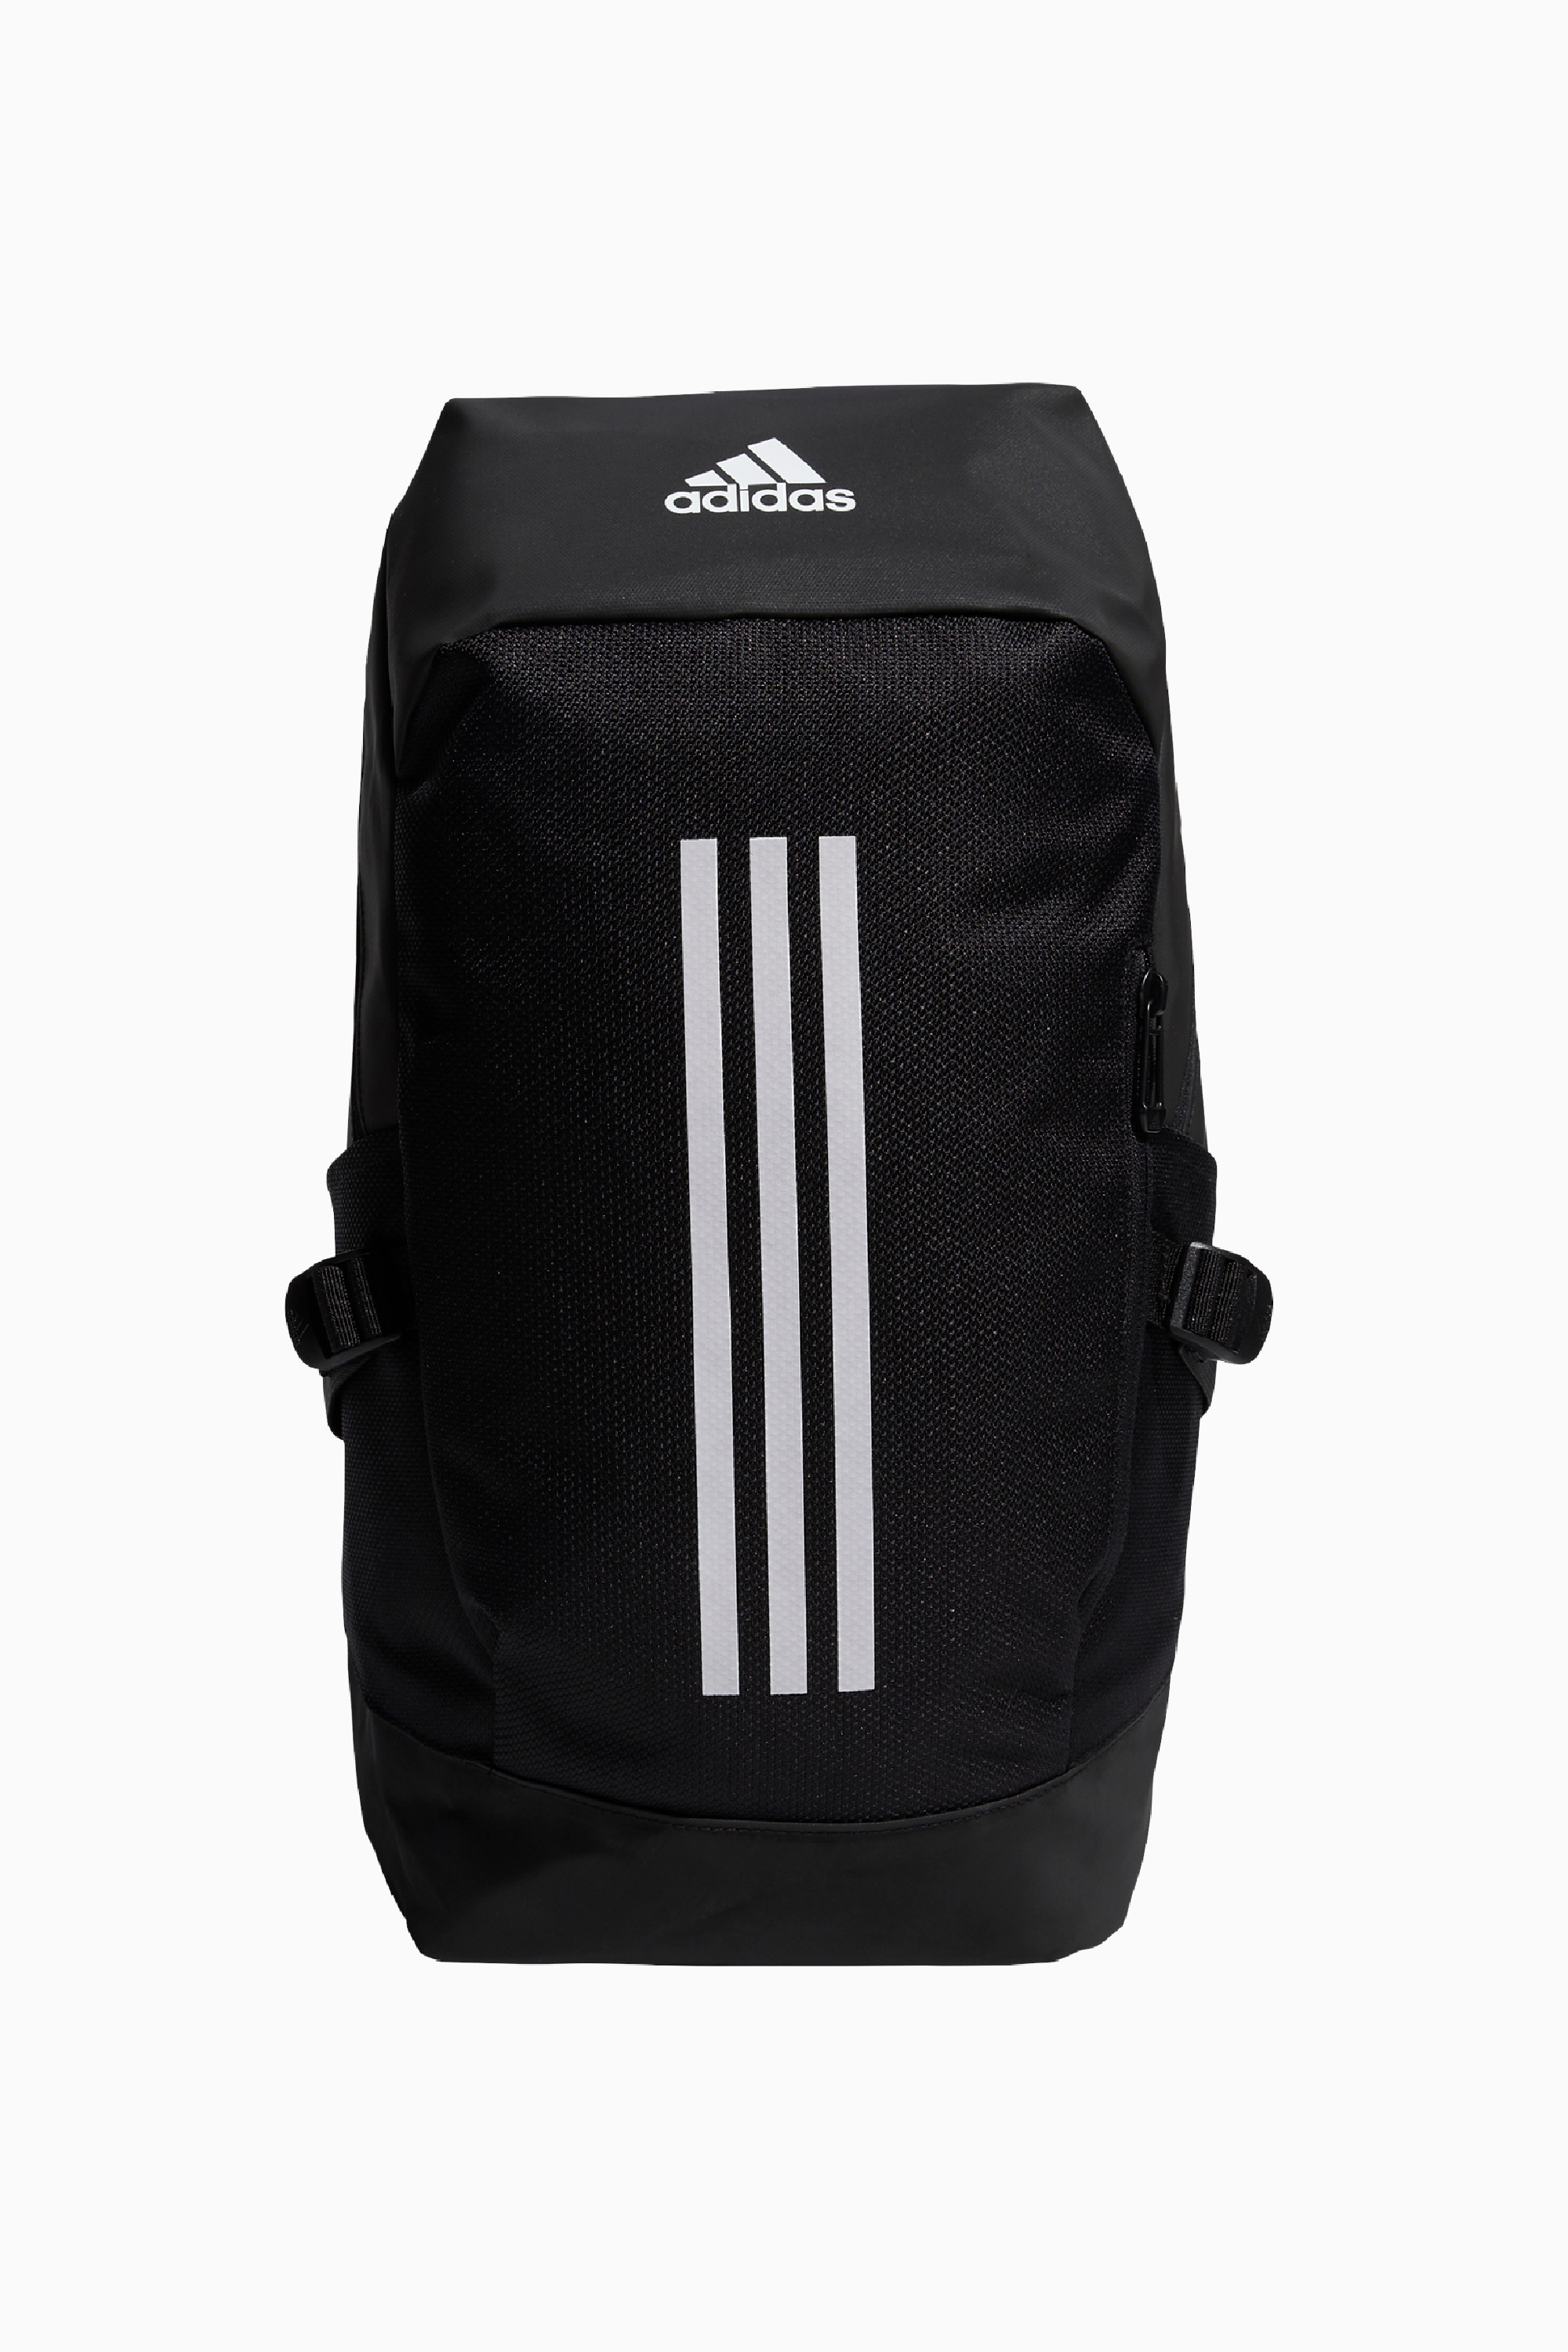 adidas Endurance Packing System Backpack 20 R-GOL.com - boots equipment